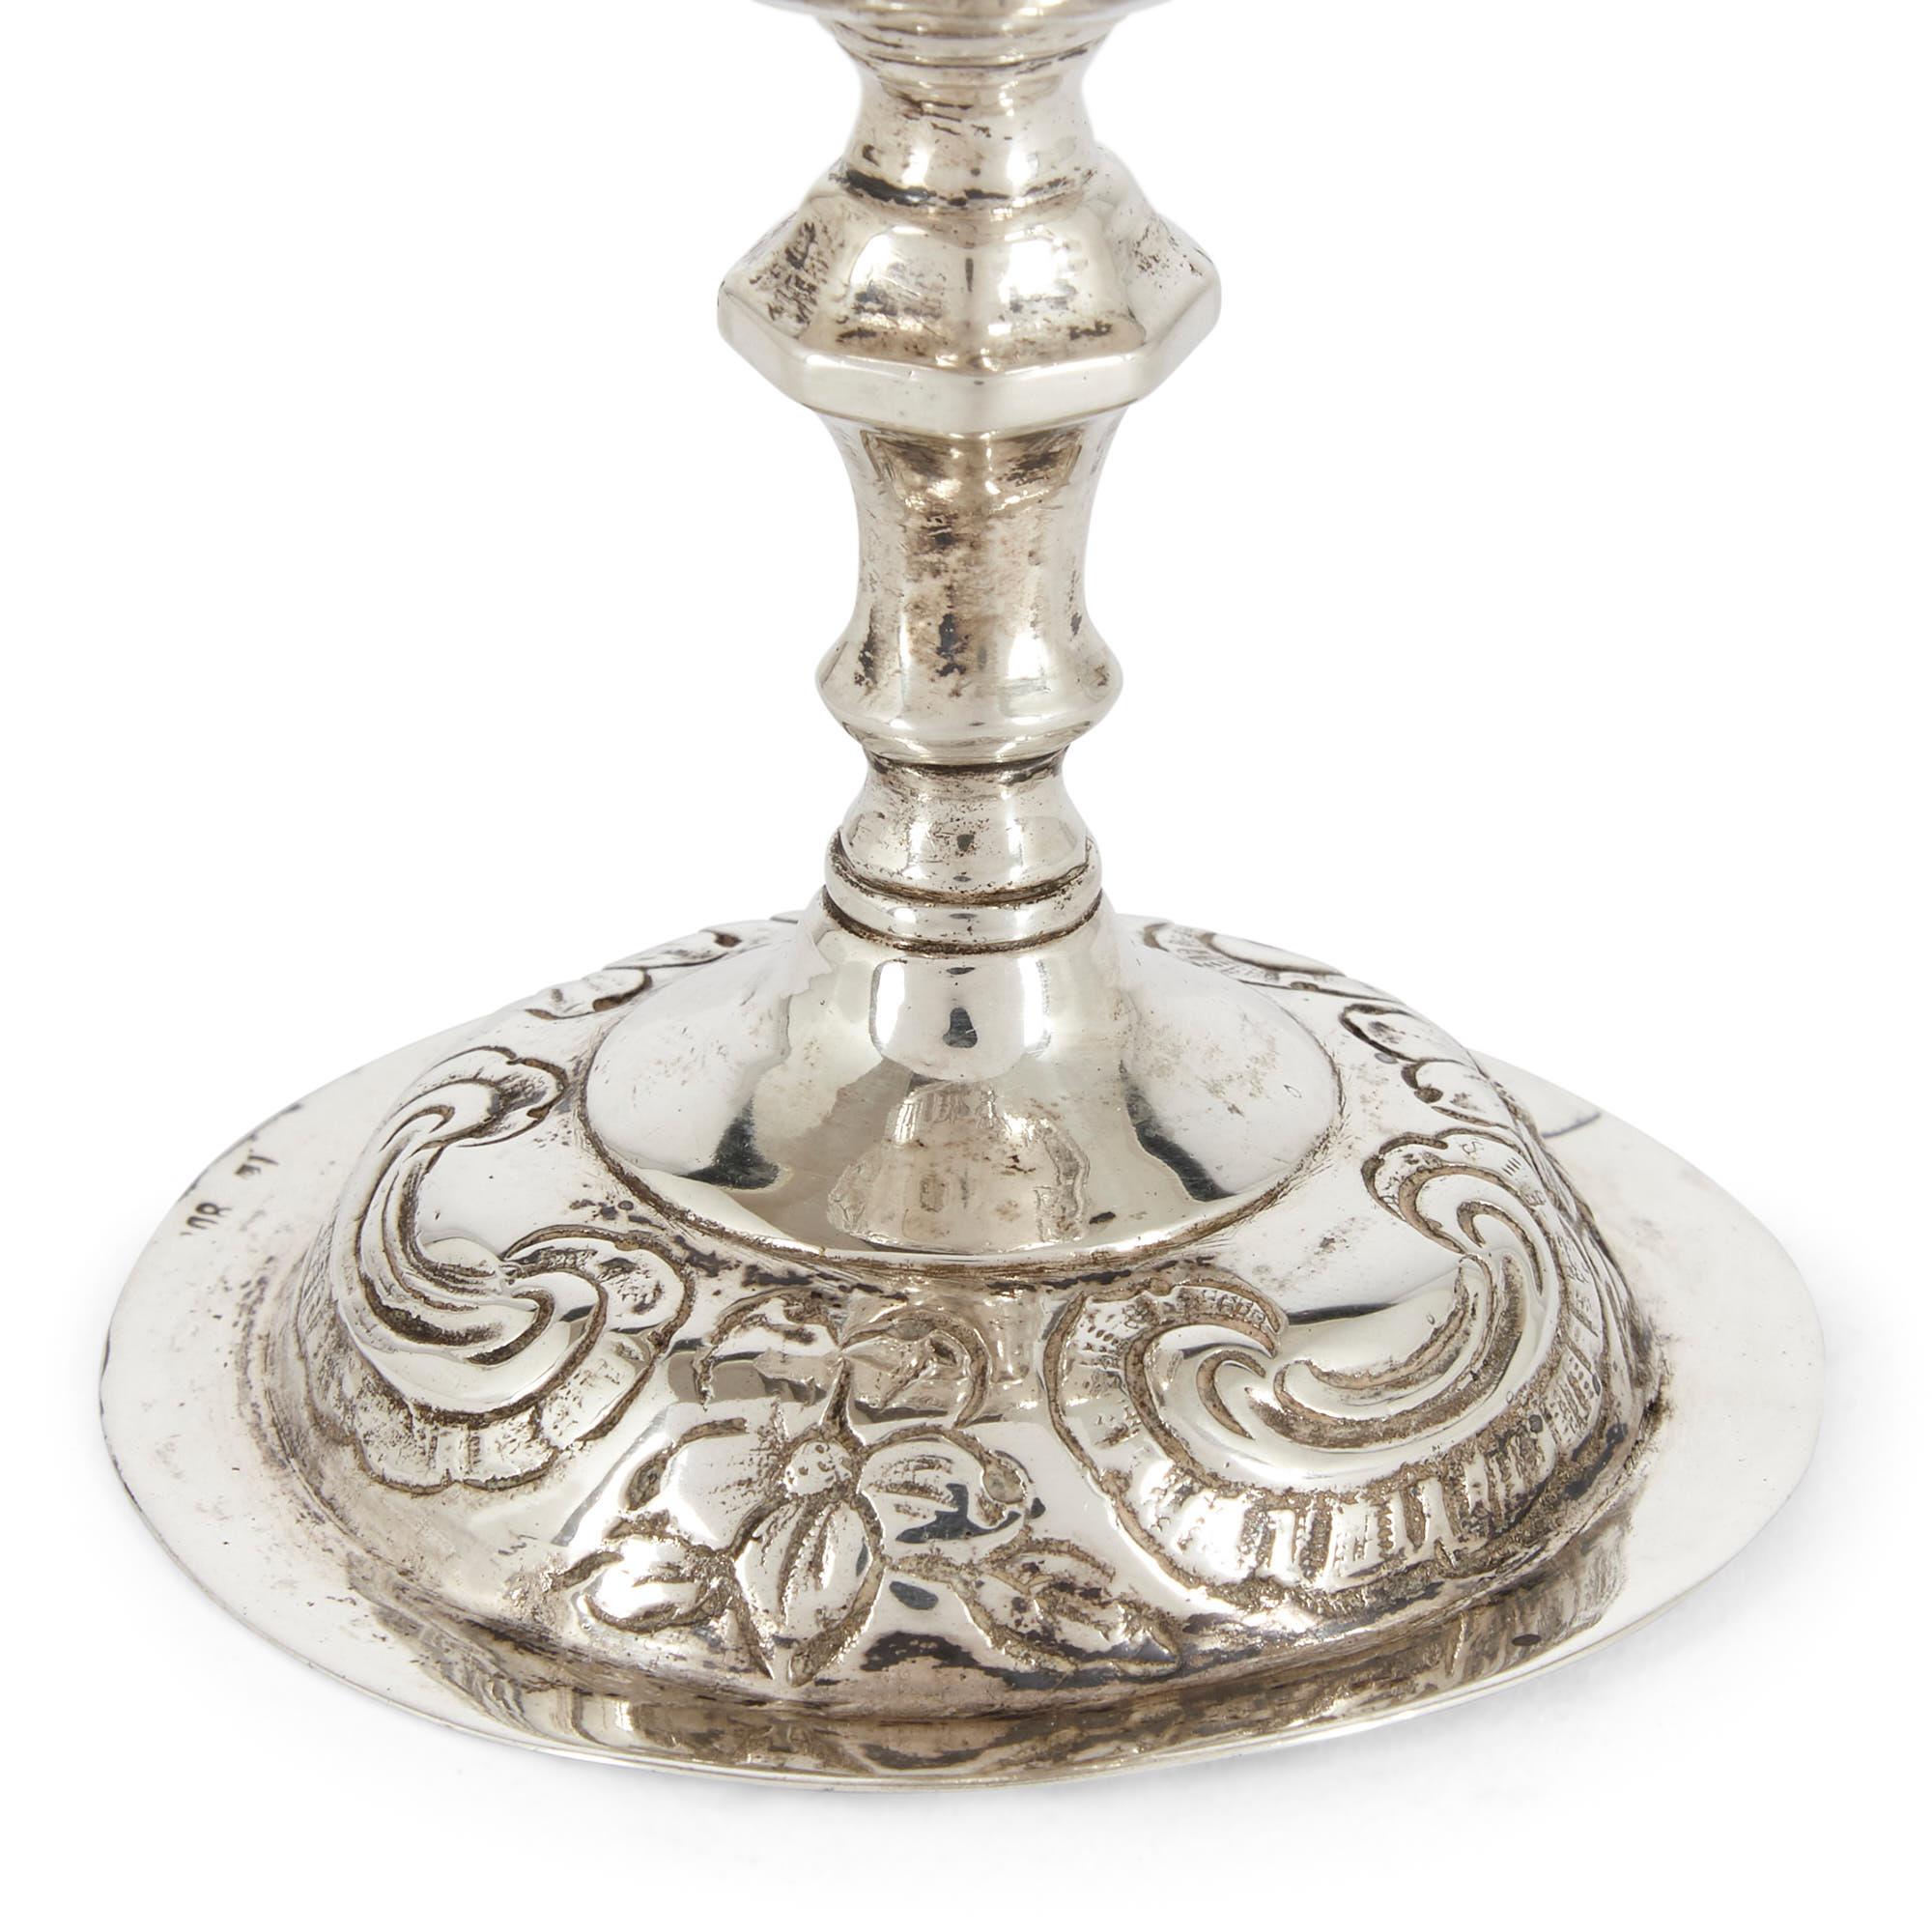 Silver Kiddush cup in 18th century style from Germany
German, late 19th century
Measures: Height 11.5cm, diameter 7cm

This fine Jewish Kiddush cup is of typical form with circular base and hexagonal bowl decorated with flowers and Hebrew